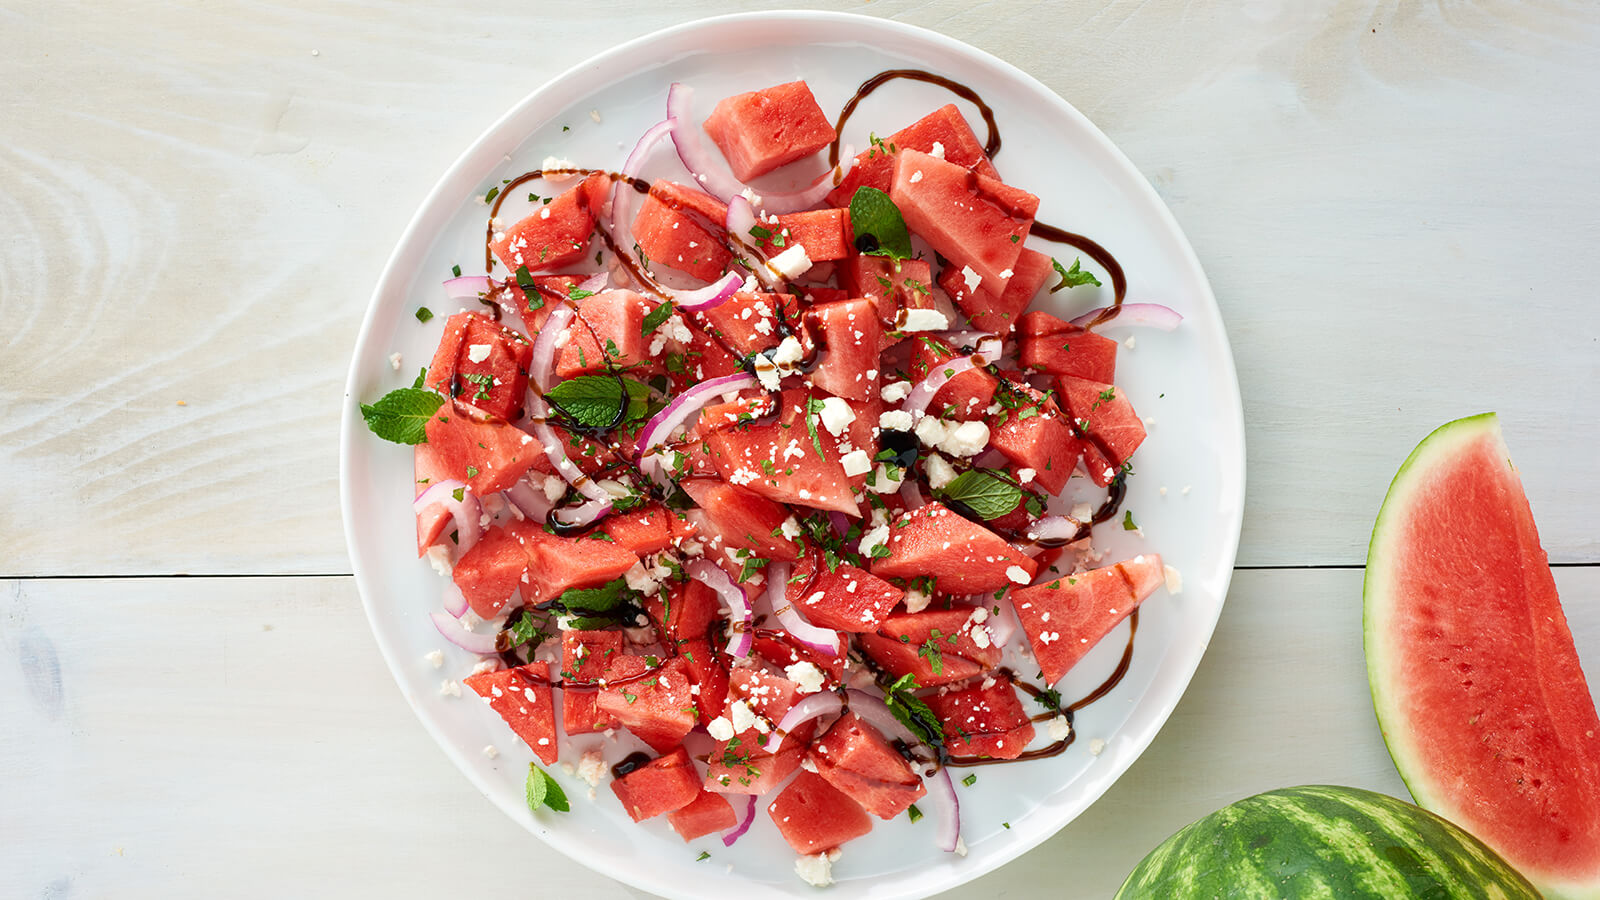 Watermelon Salad with Balsamic, Mint and Feta